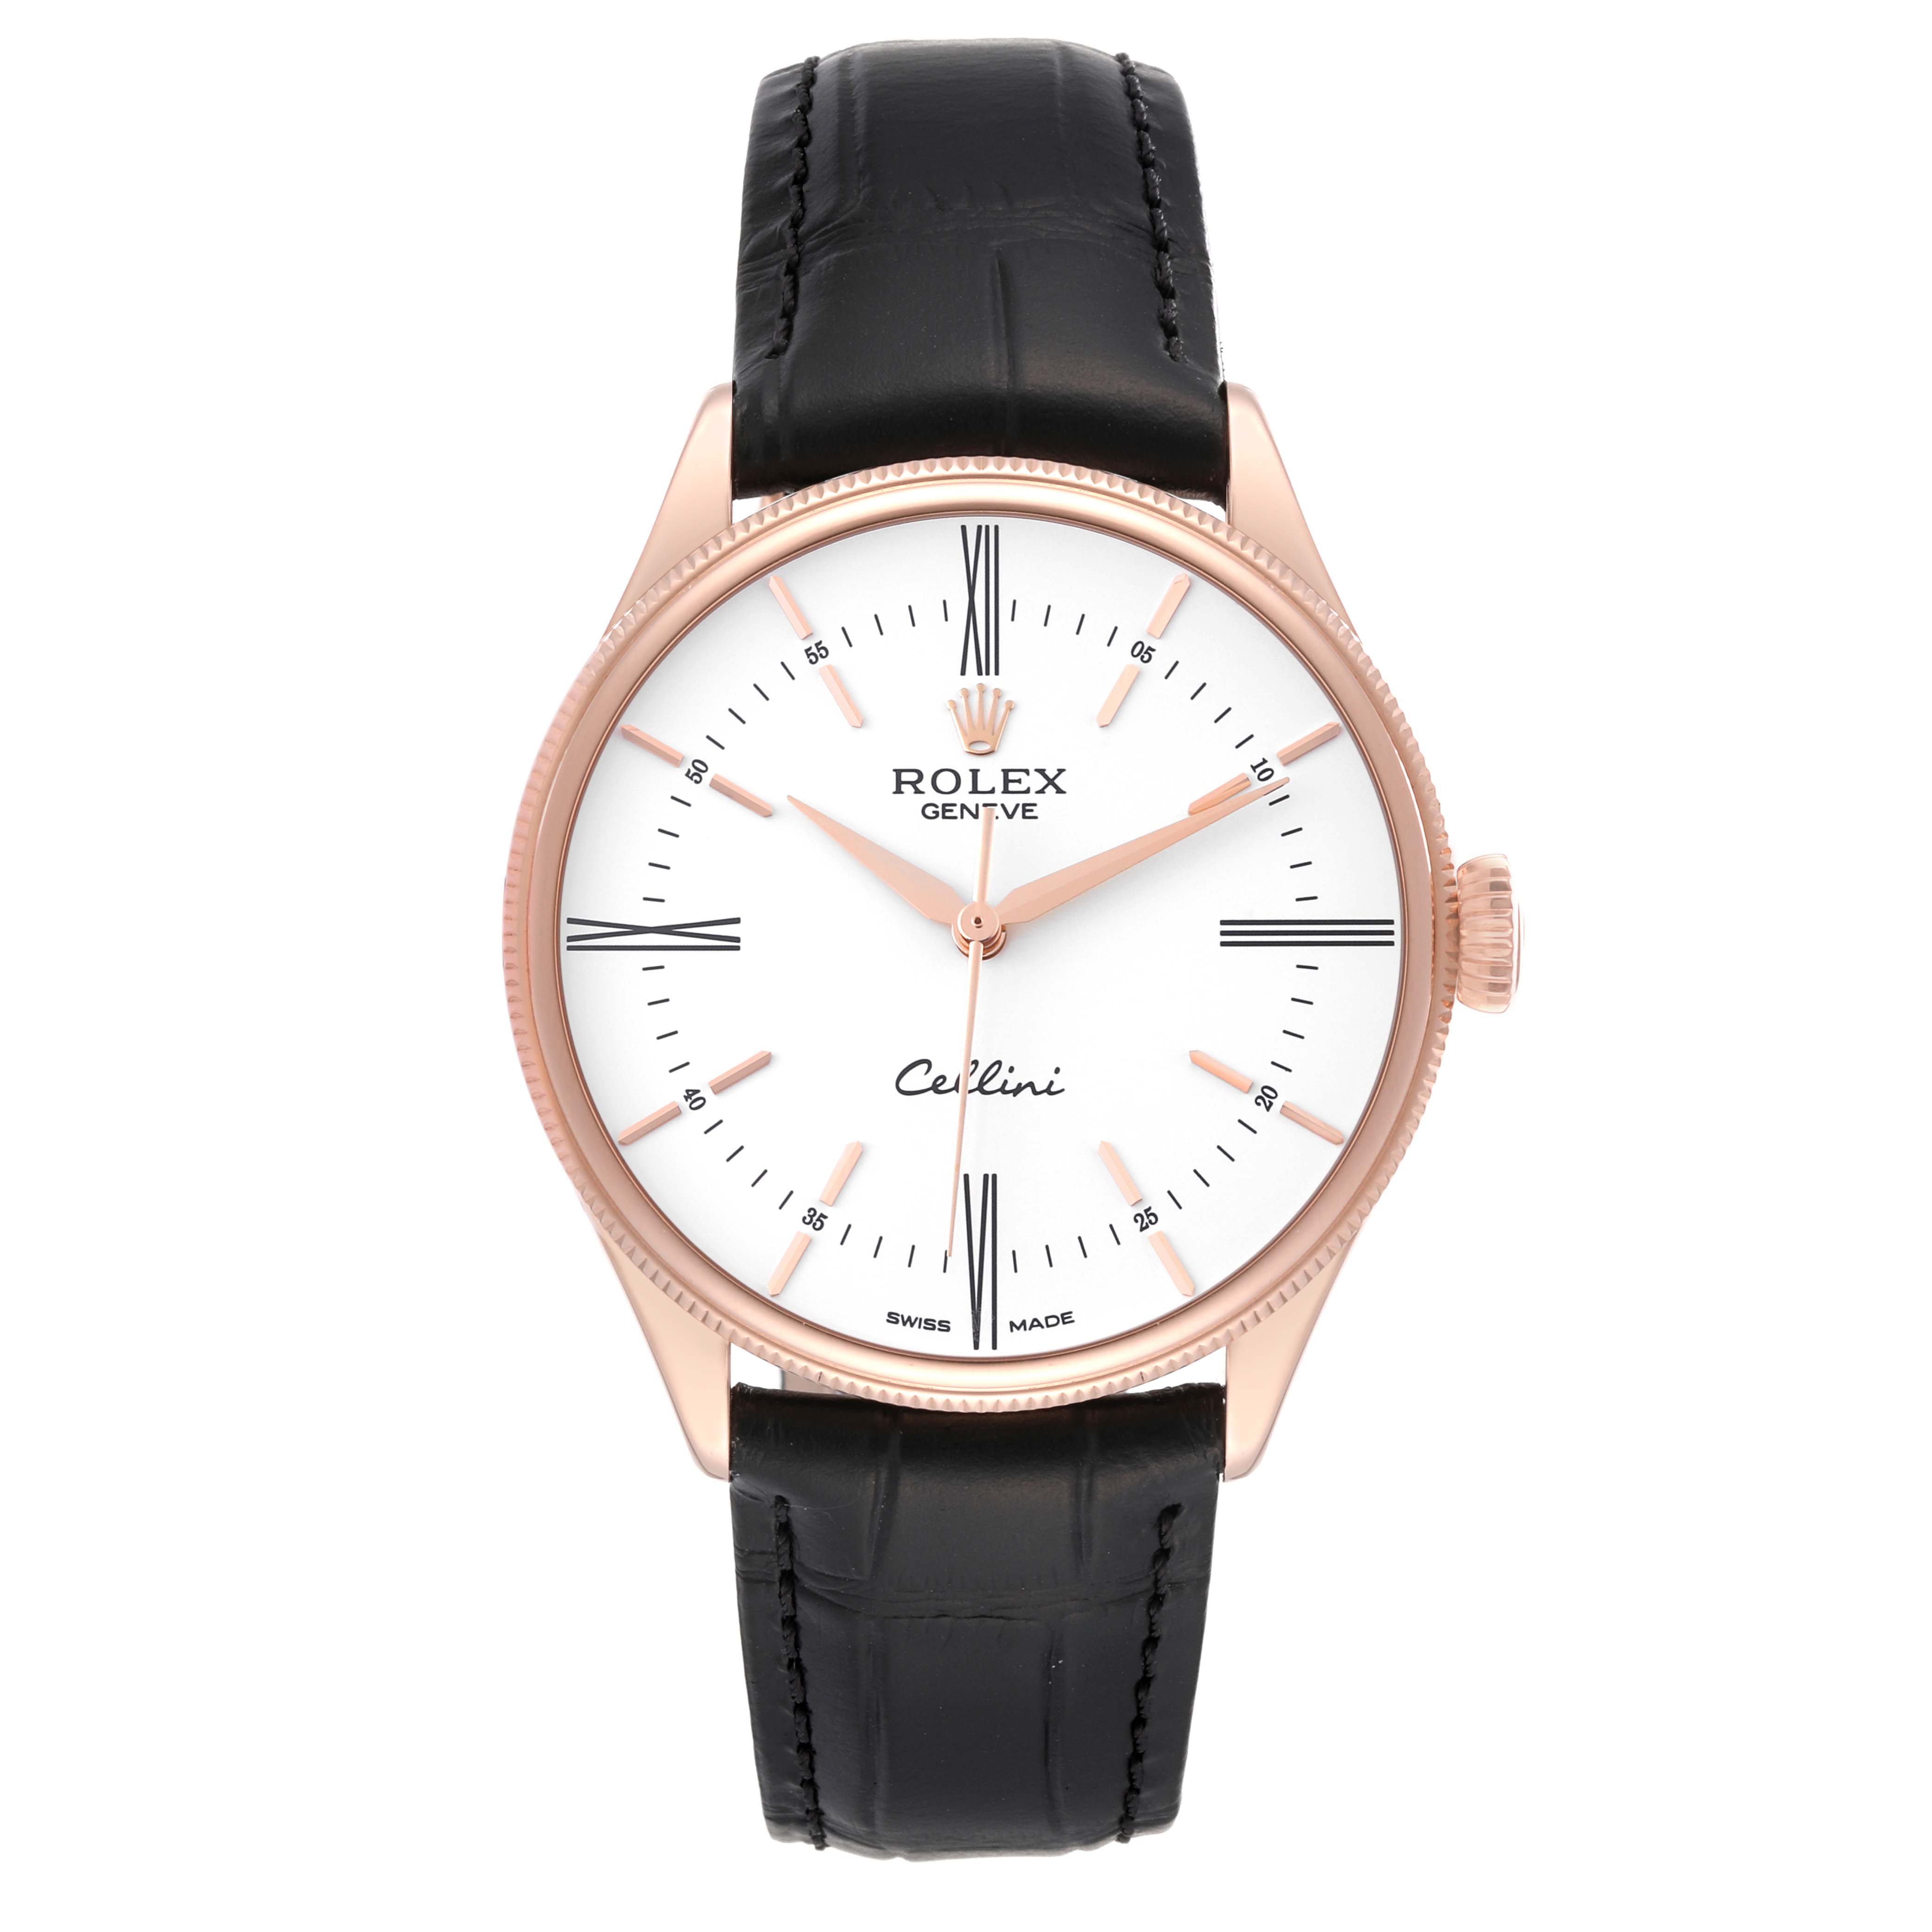 Rolex Cellini Time White Dial Rose Gold Mens Watch 50505 | SwissWatchExpo